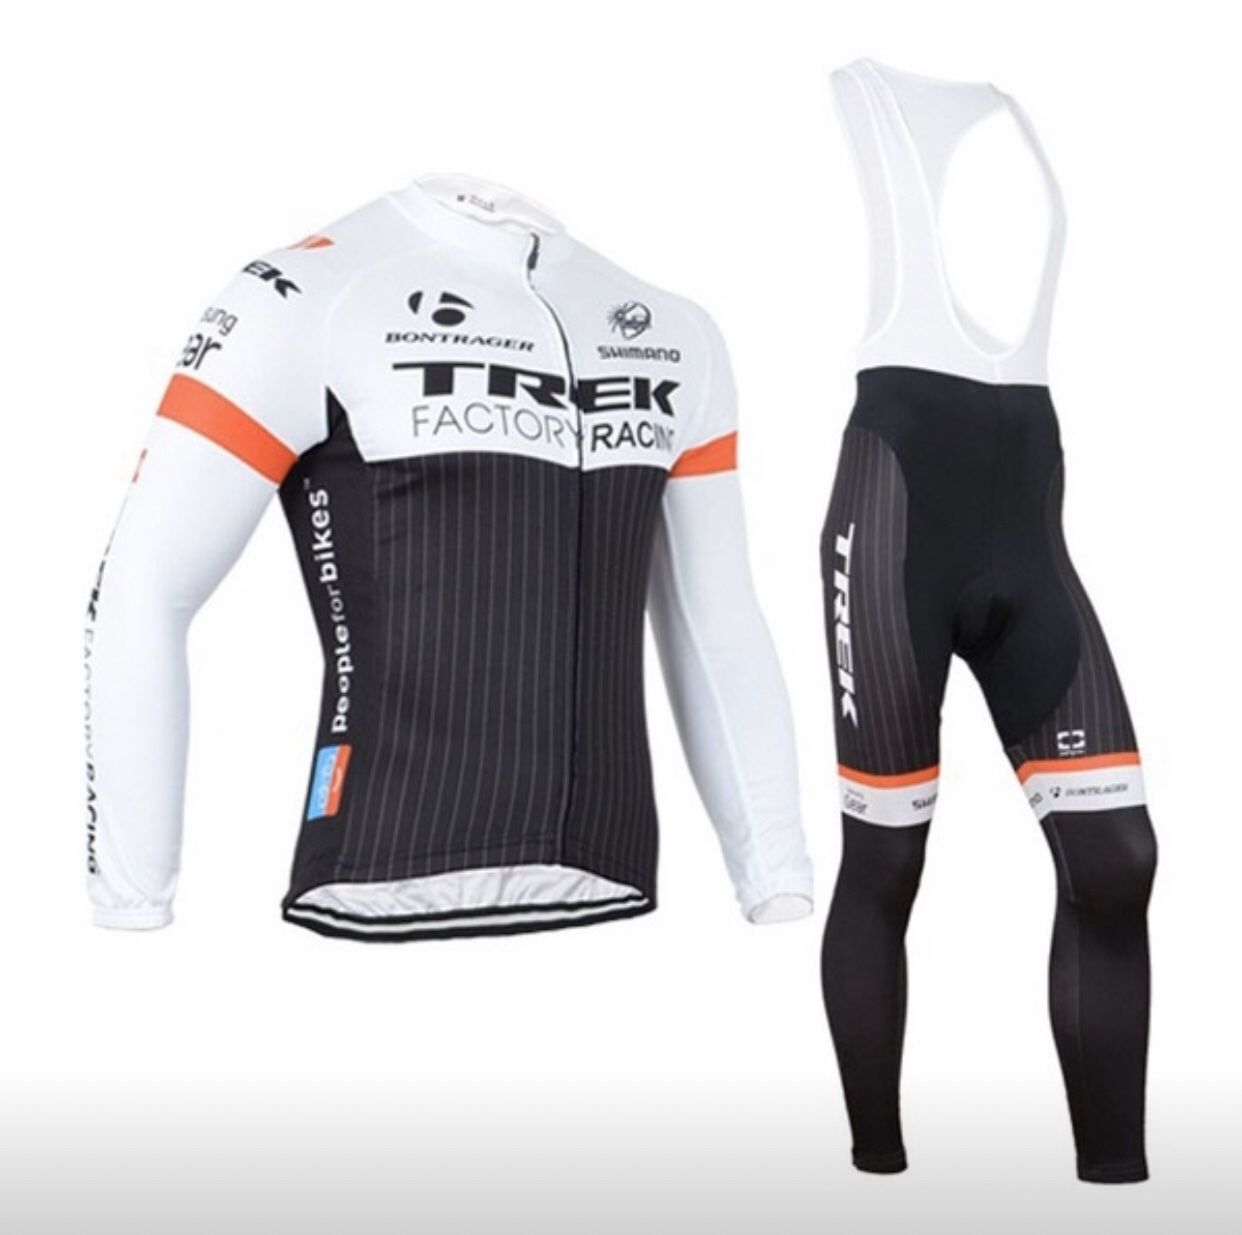 New Trek-Shimano XL Bike Suit … Summer Quick Dry Long Sleeve Cycling Jersey and Bib Breathable Padded Pants